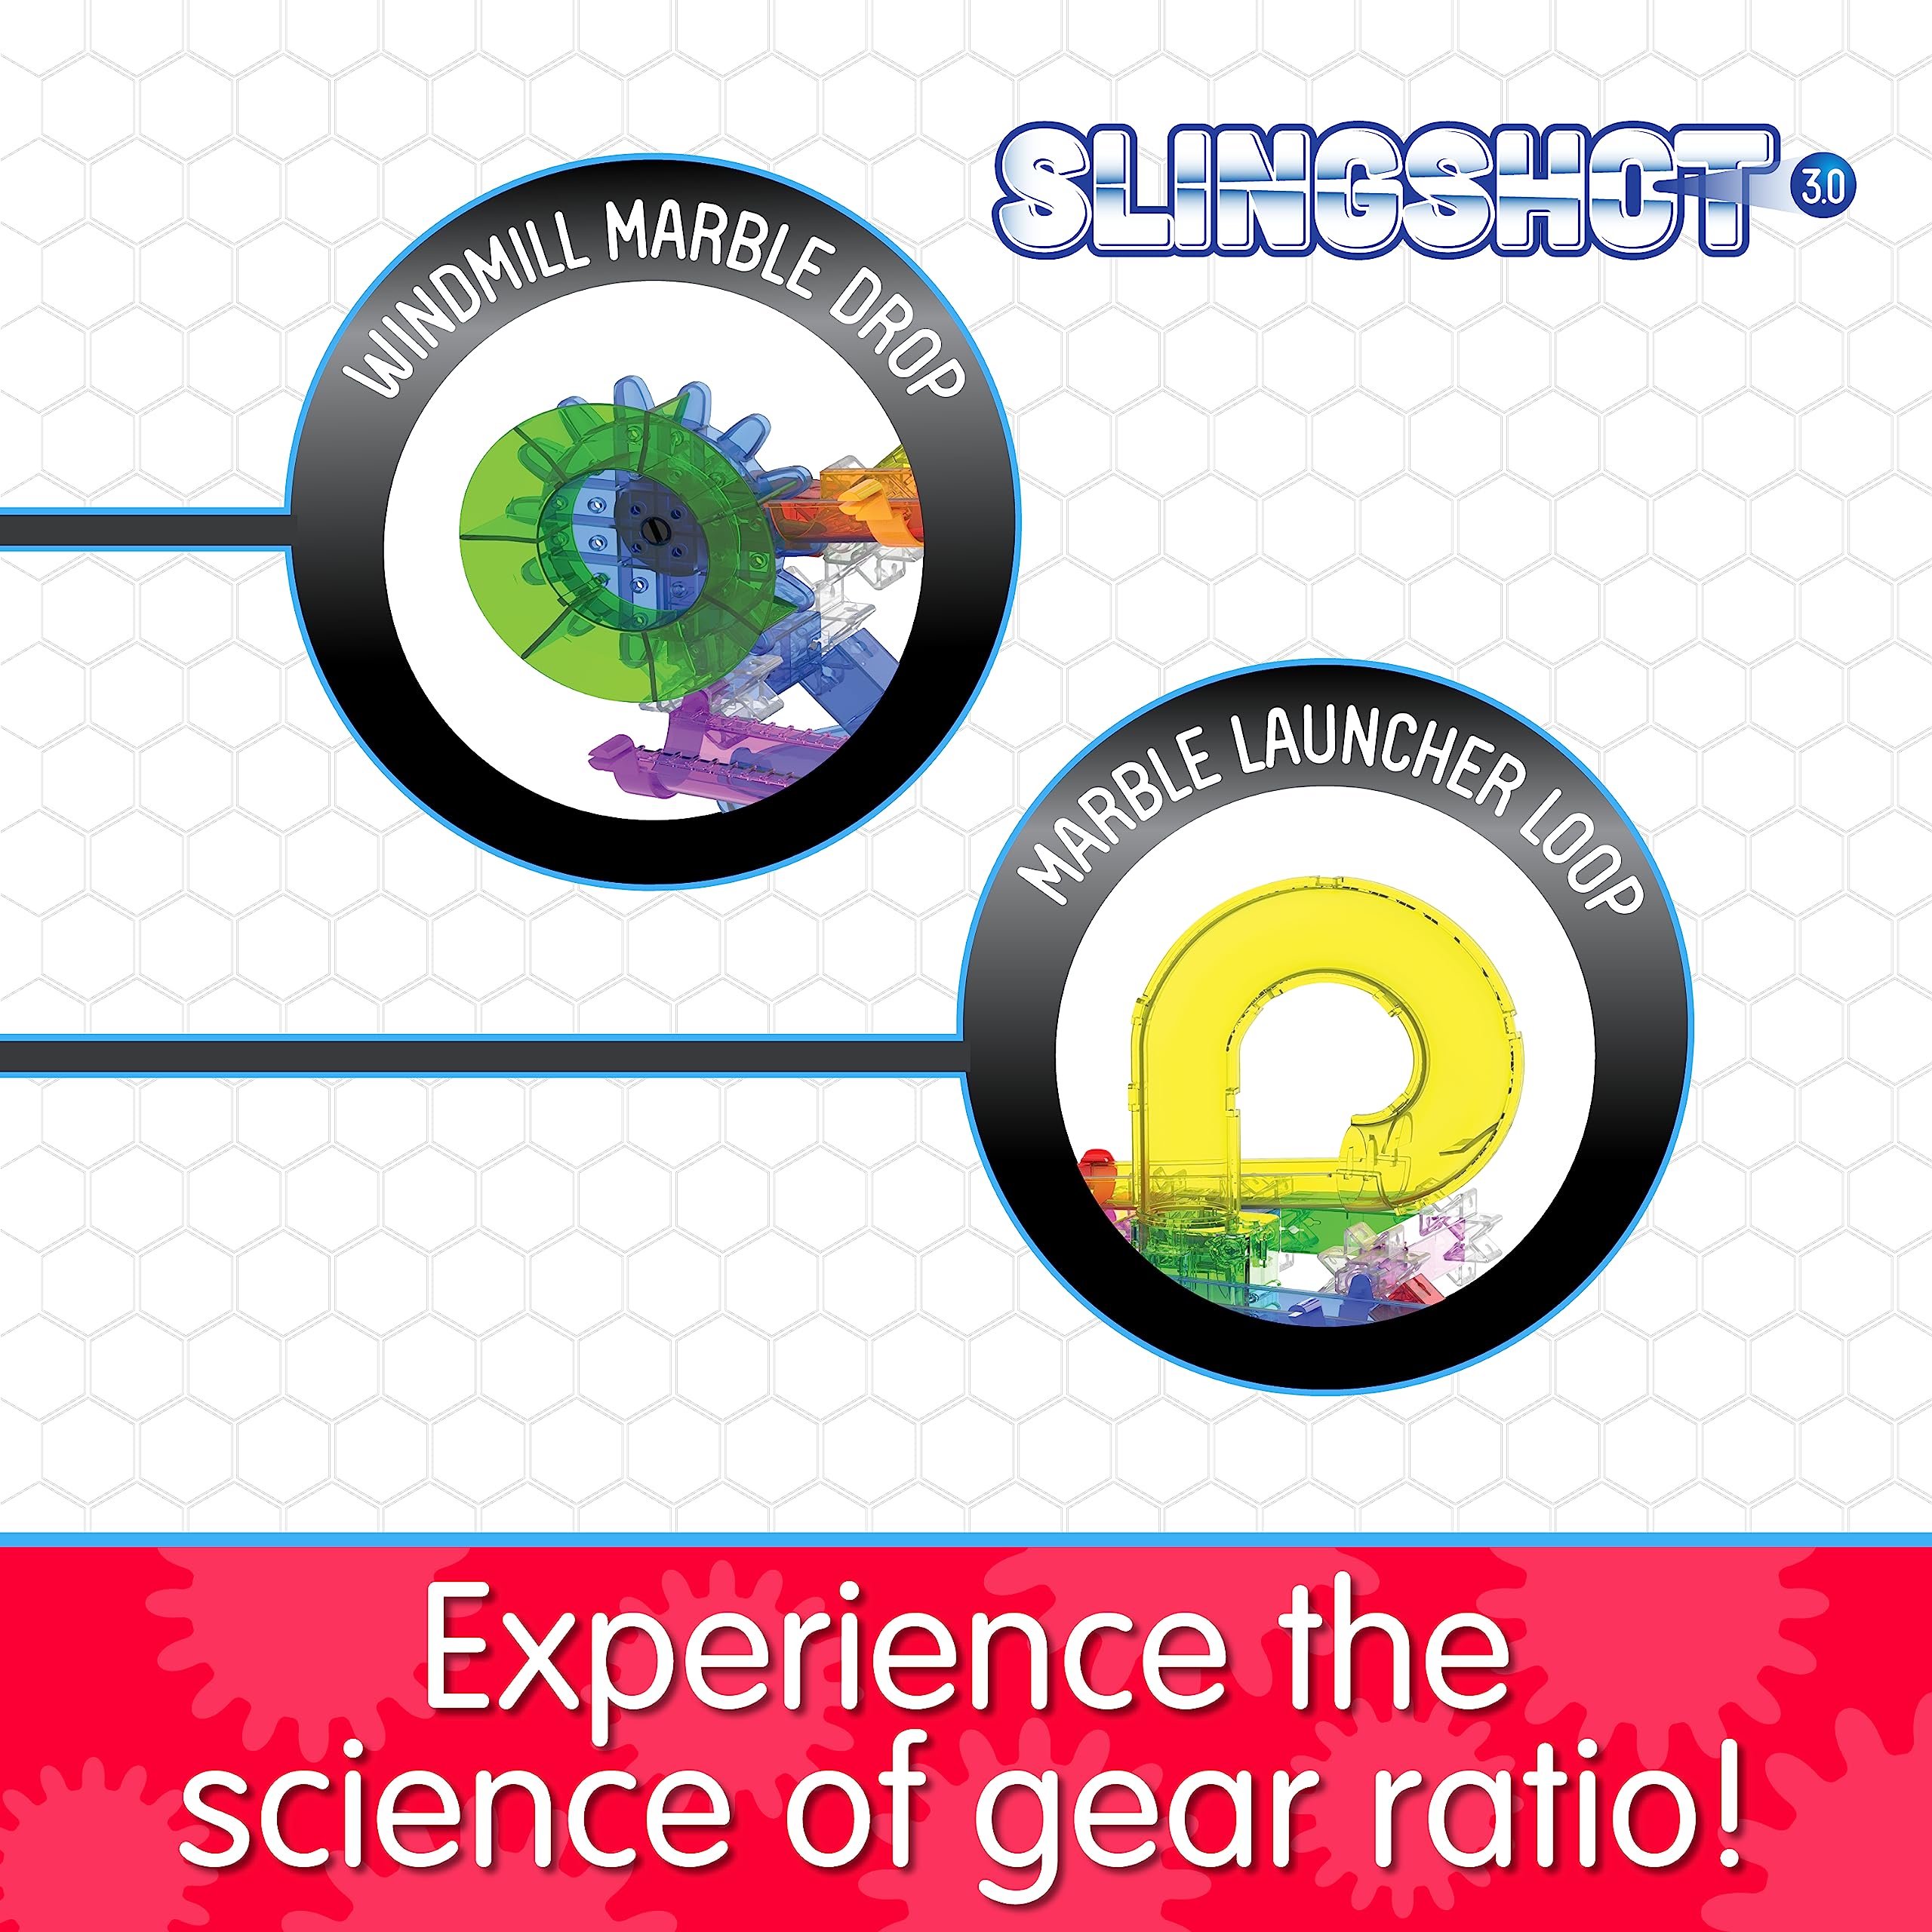 The Learning Journey: Techno Gears Marble Mania - Slingshot 3.0 (80+ pcs) - Marble Run for Kids Ages 6 and Up - Award Winning Toys